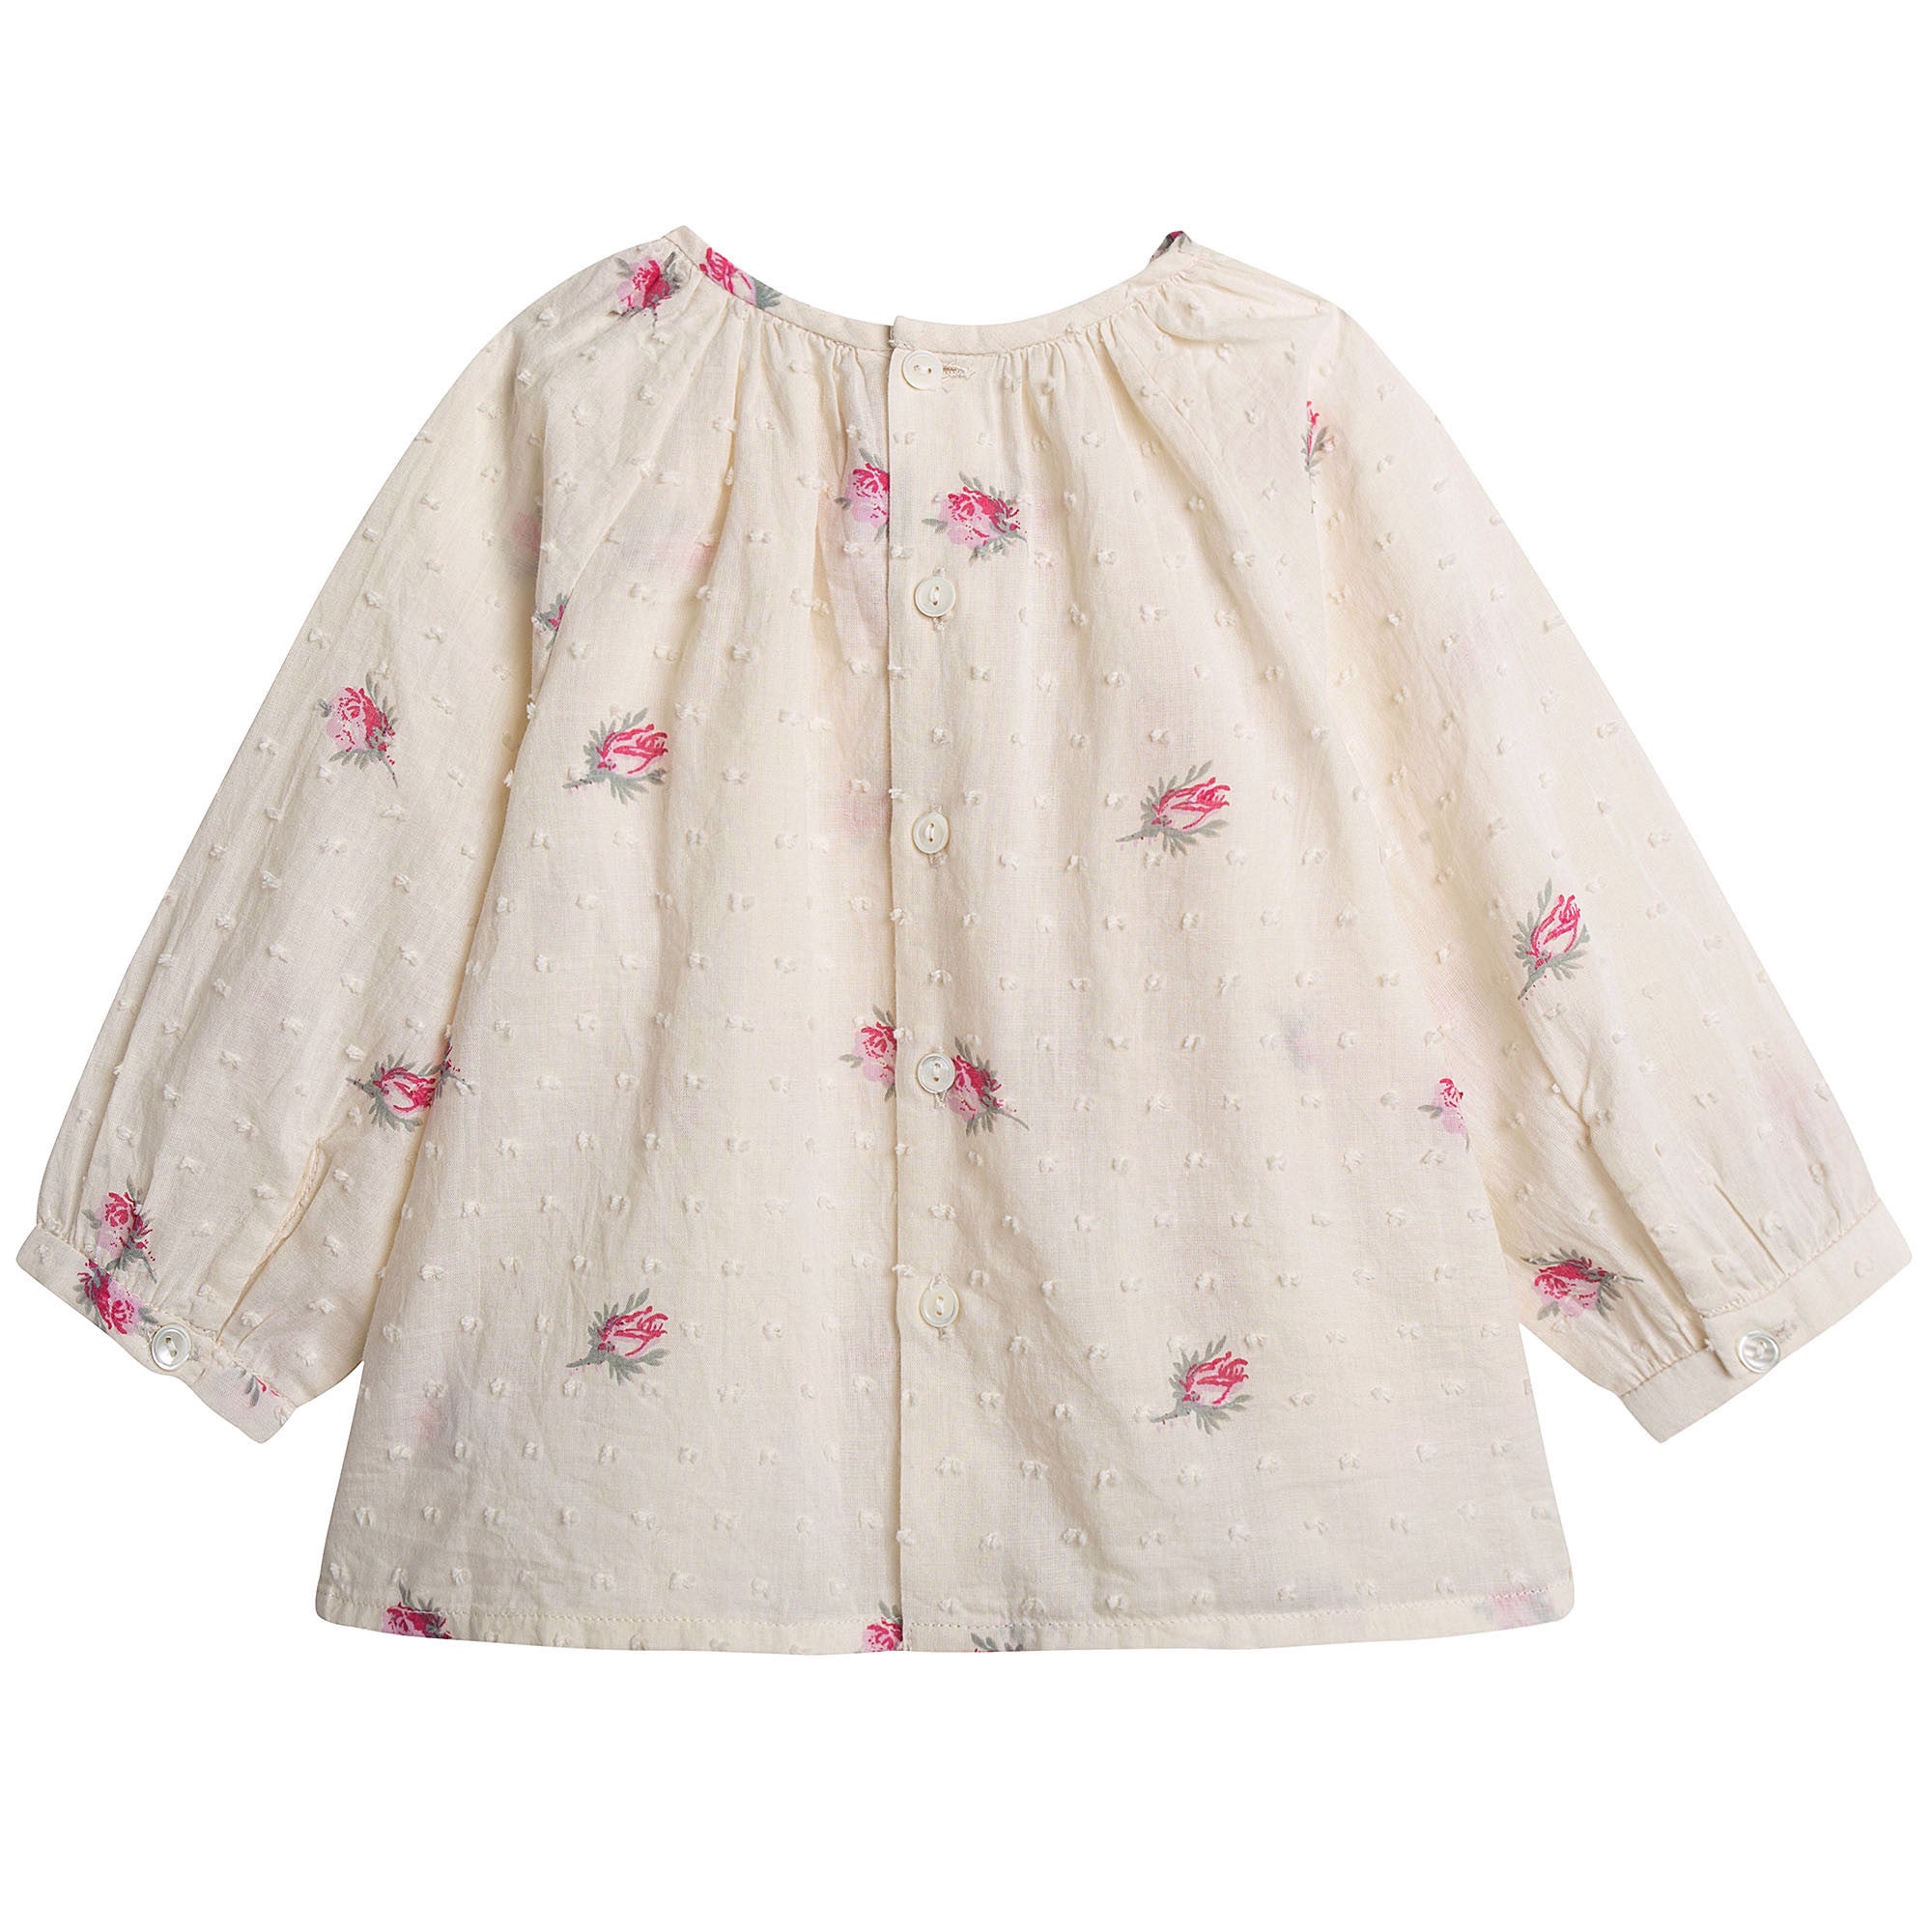 Baby Girls Lvory With Pink Flowers Blouse - CÉMAROSE | Children's Fashion Store - 2